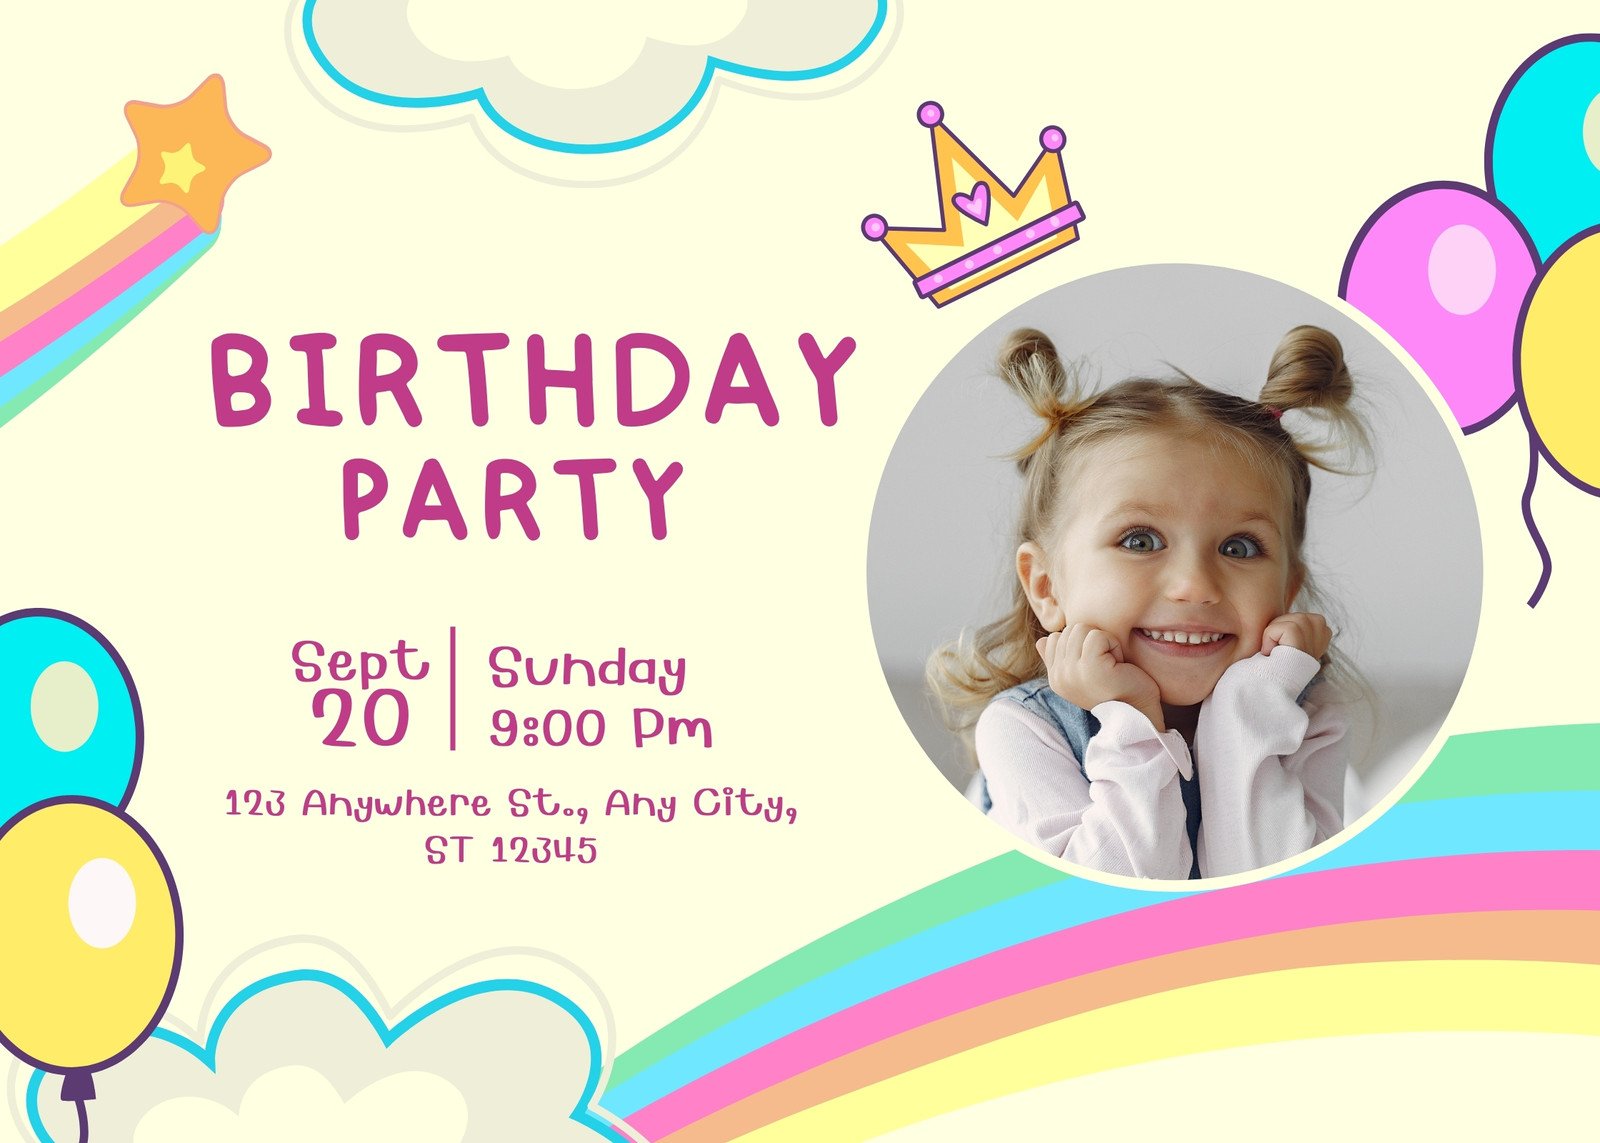 Birthday Invitation Pictures  Download Free Images on Unsplash